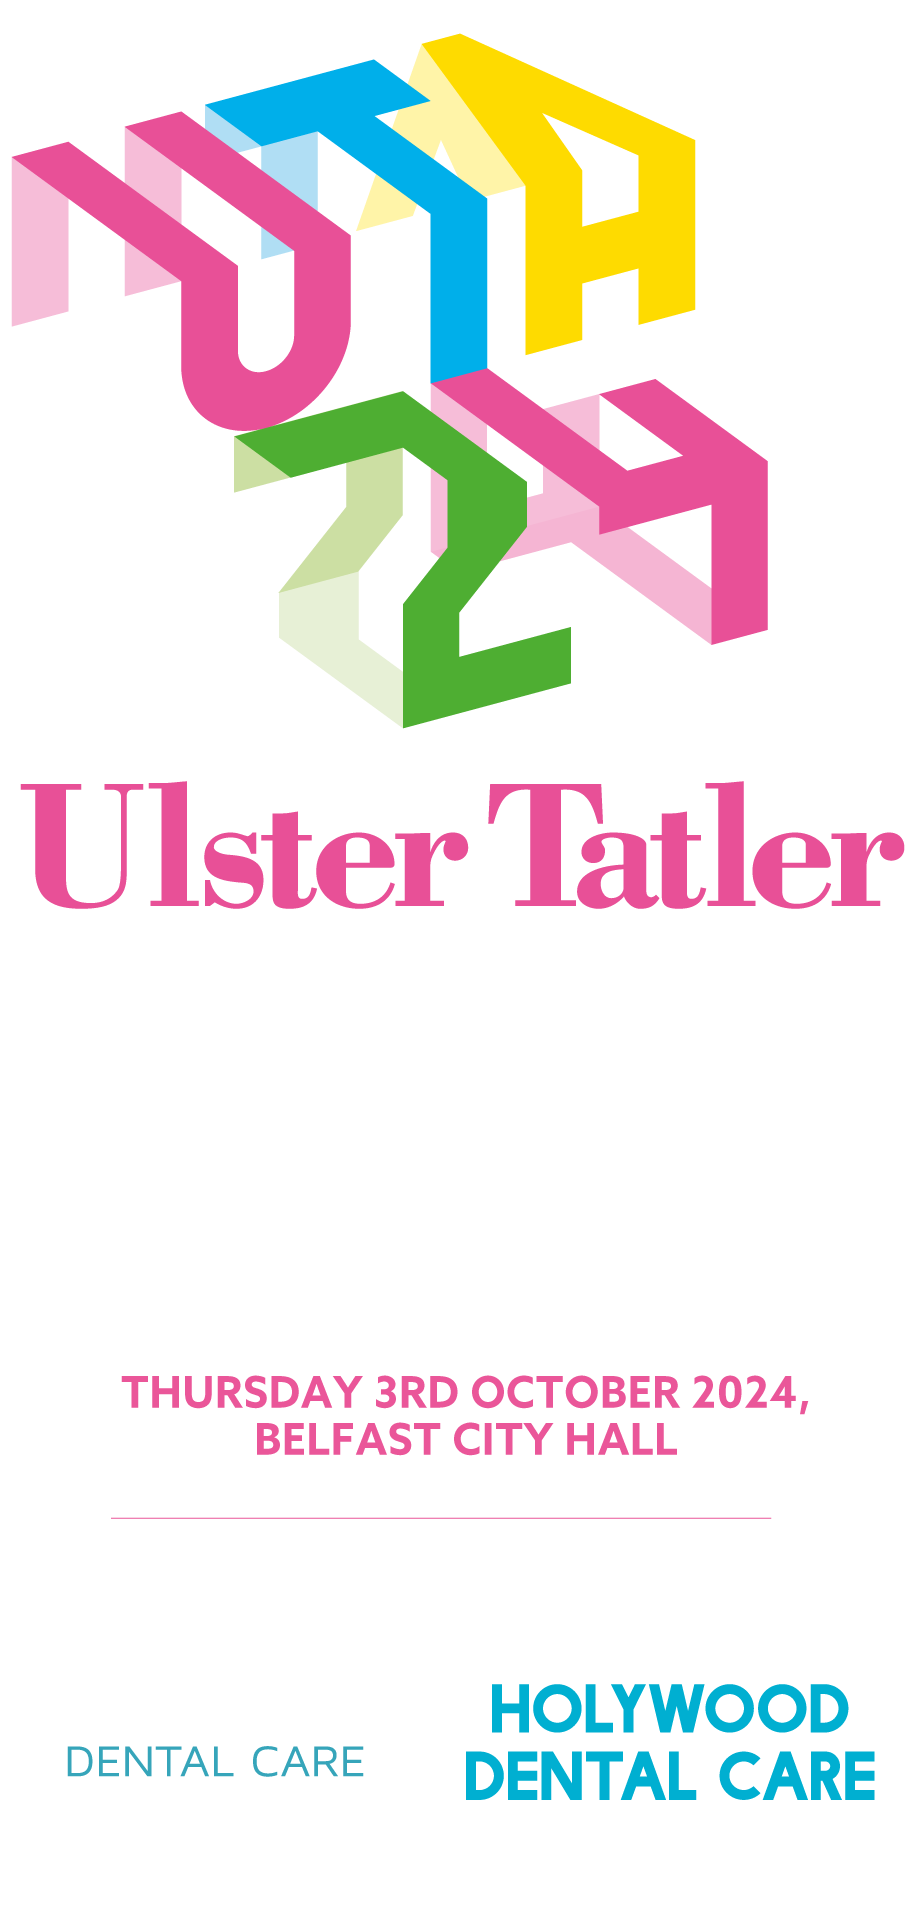 Ulster Tatler Awards 2024 log with the event on Thursday 3rd of October 2024 at Belfast Cirty Hall